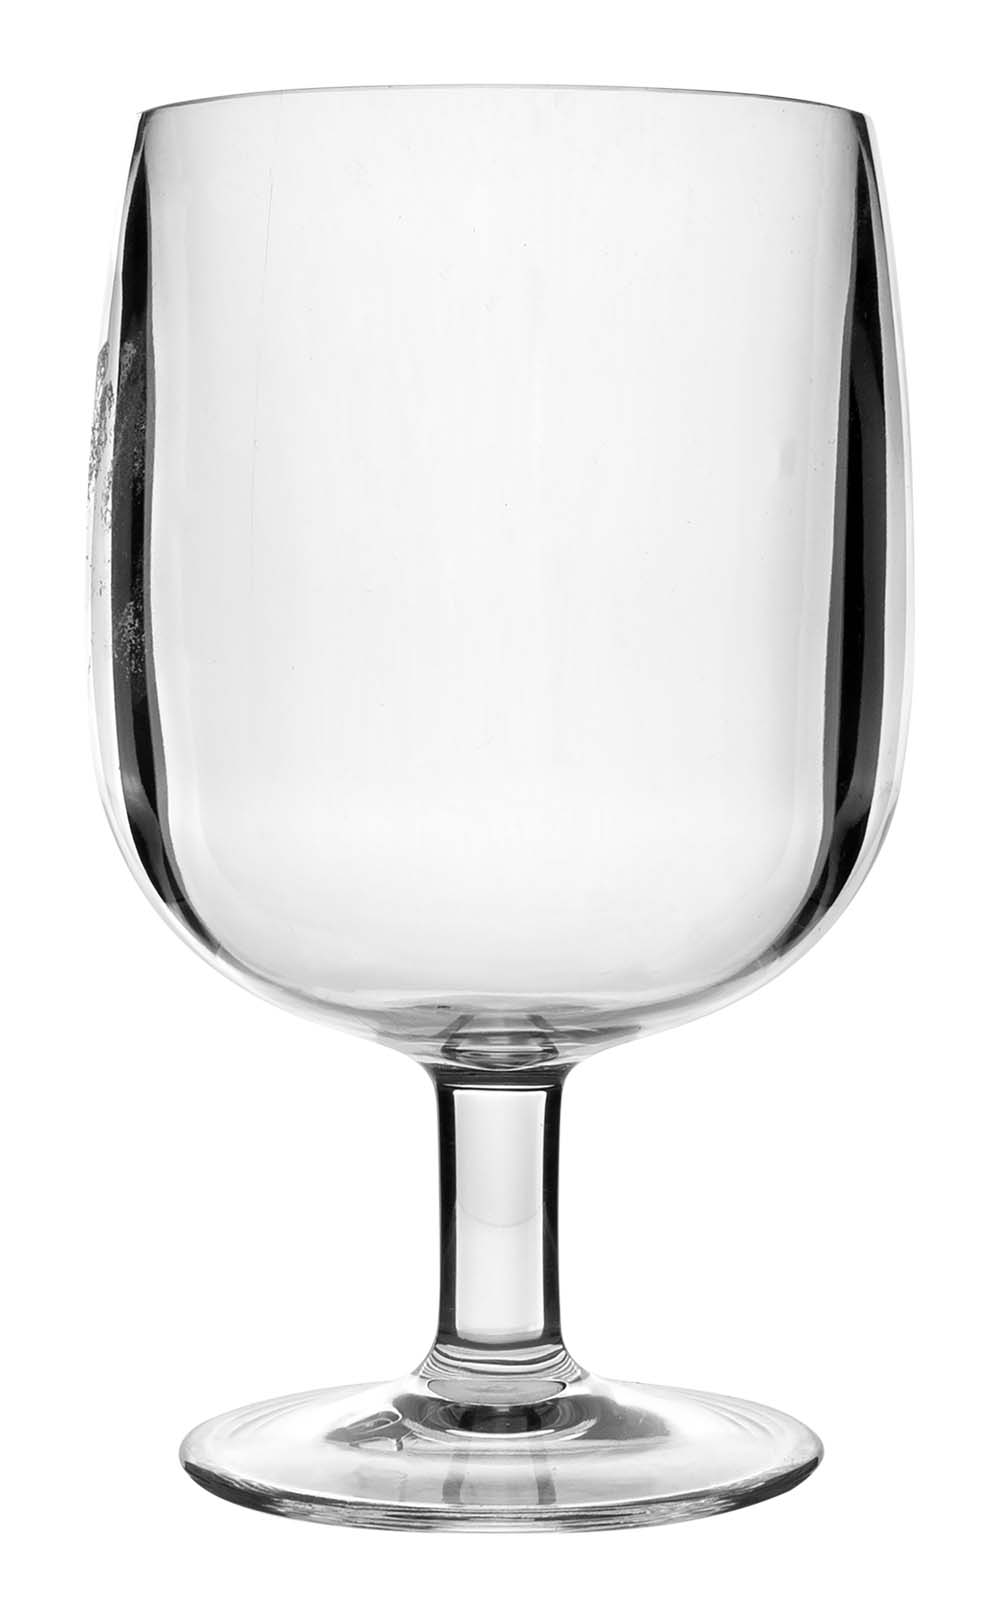 6101401 A set of 4 compact stackable wine glasses. Made of strong plastic, virtually unbreakable and lightweight. The glasses are BPA free.